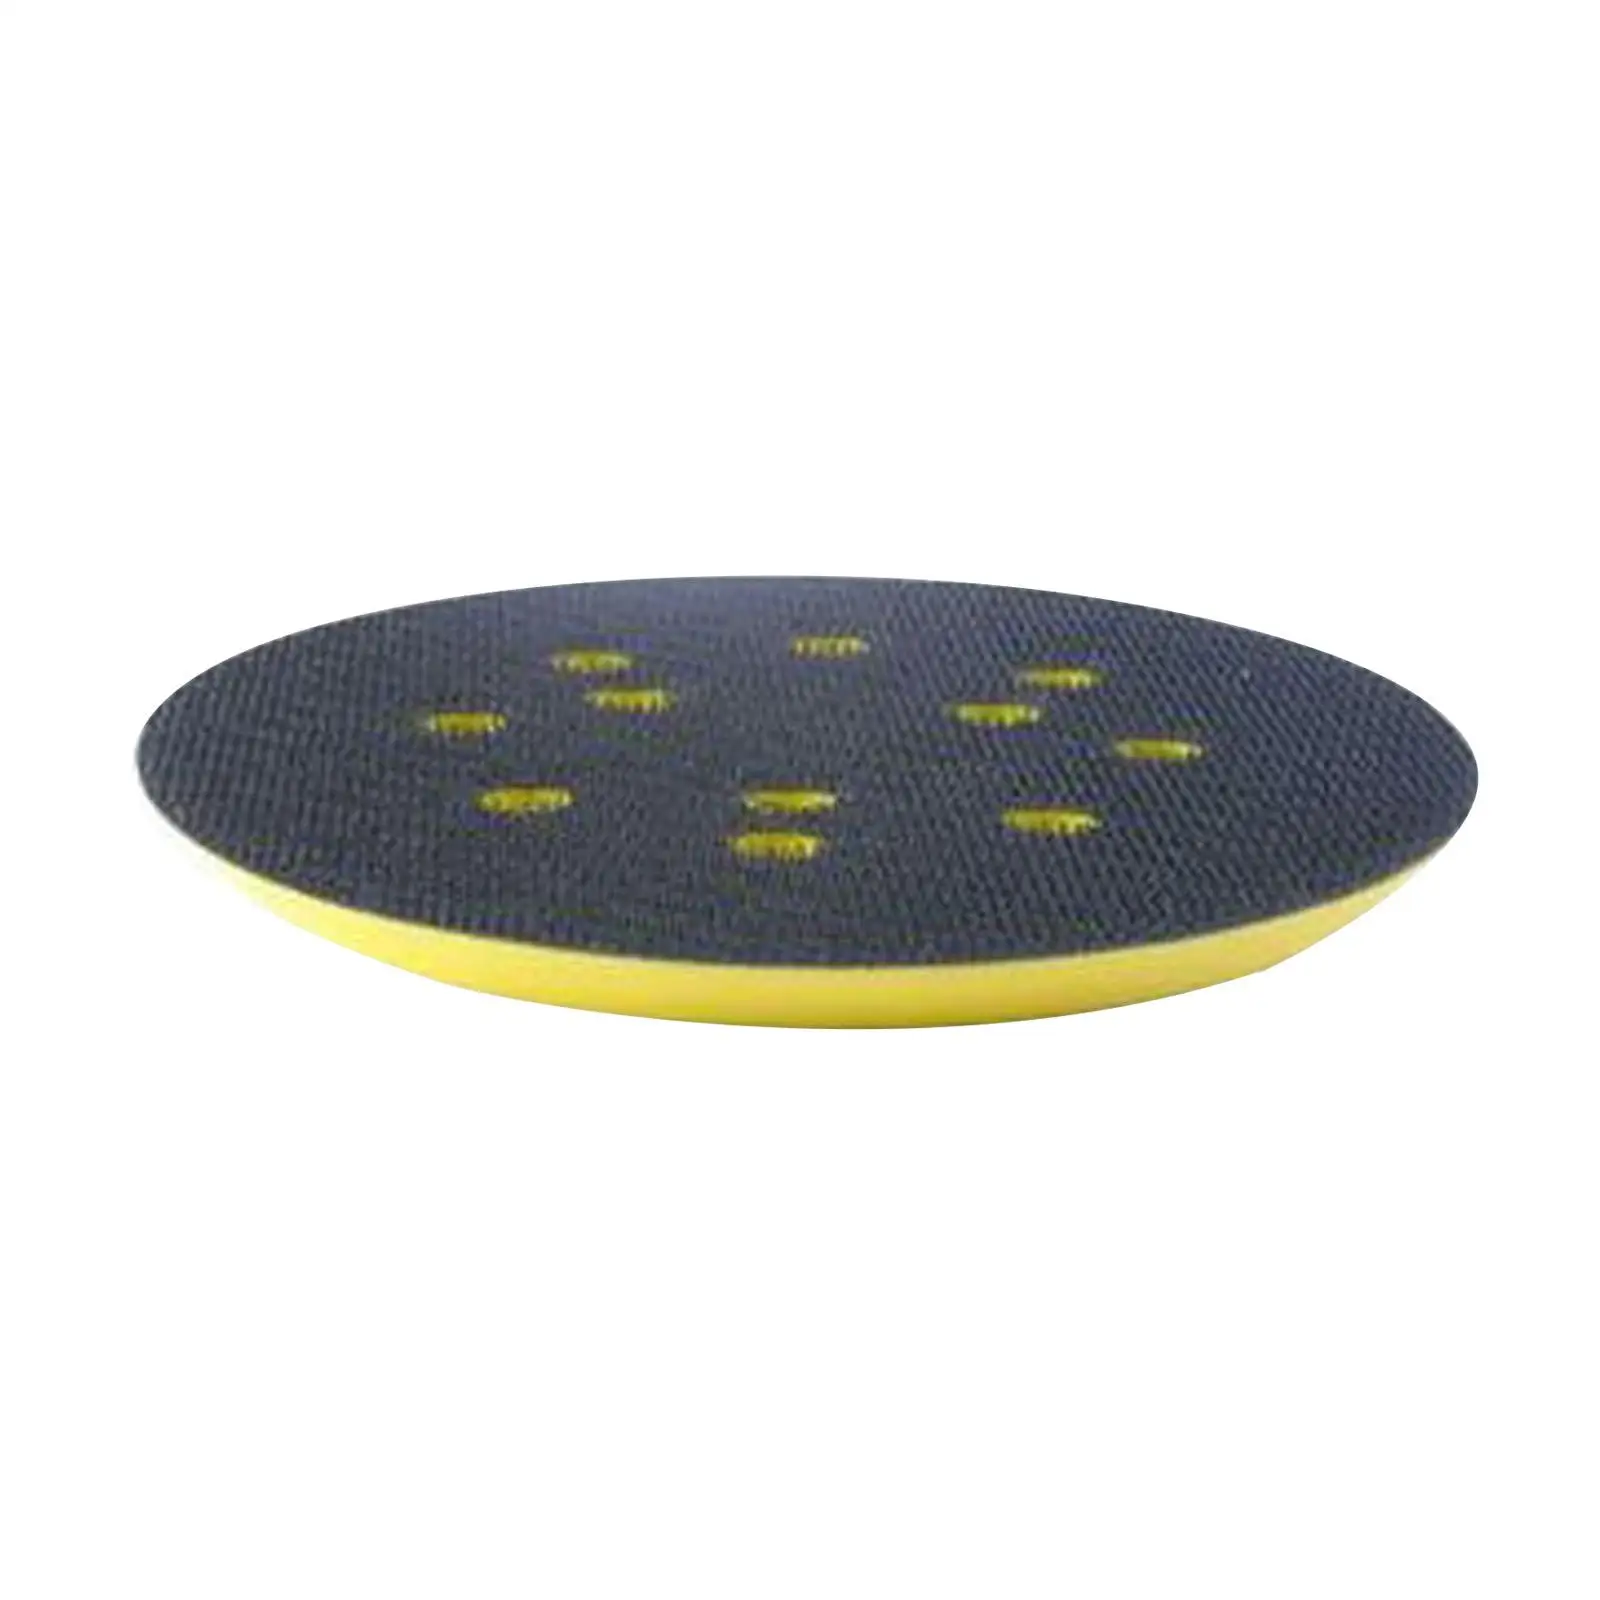 5 inch 125mm Polishing Backing Pad Ventilation Replacement for Woodworking